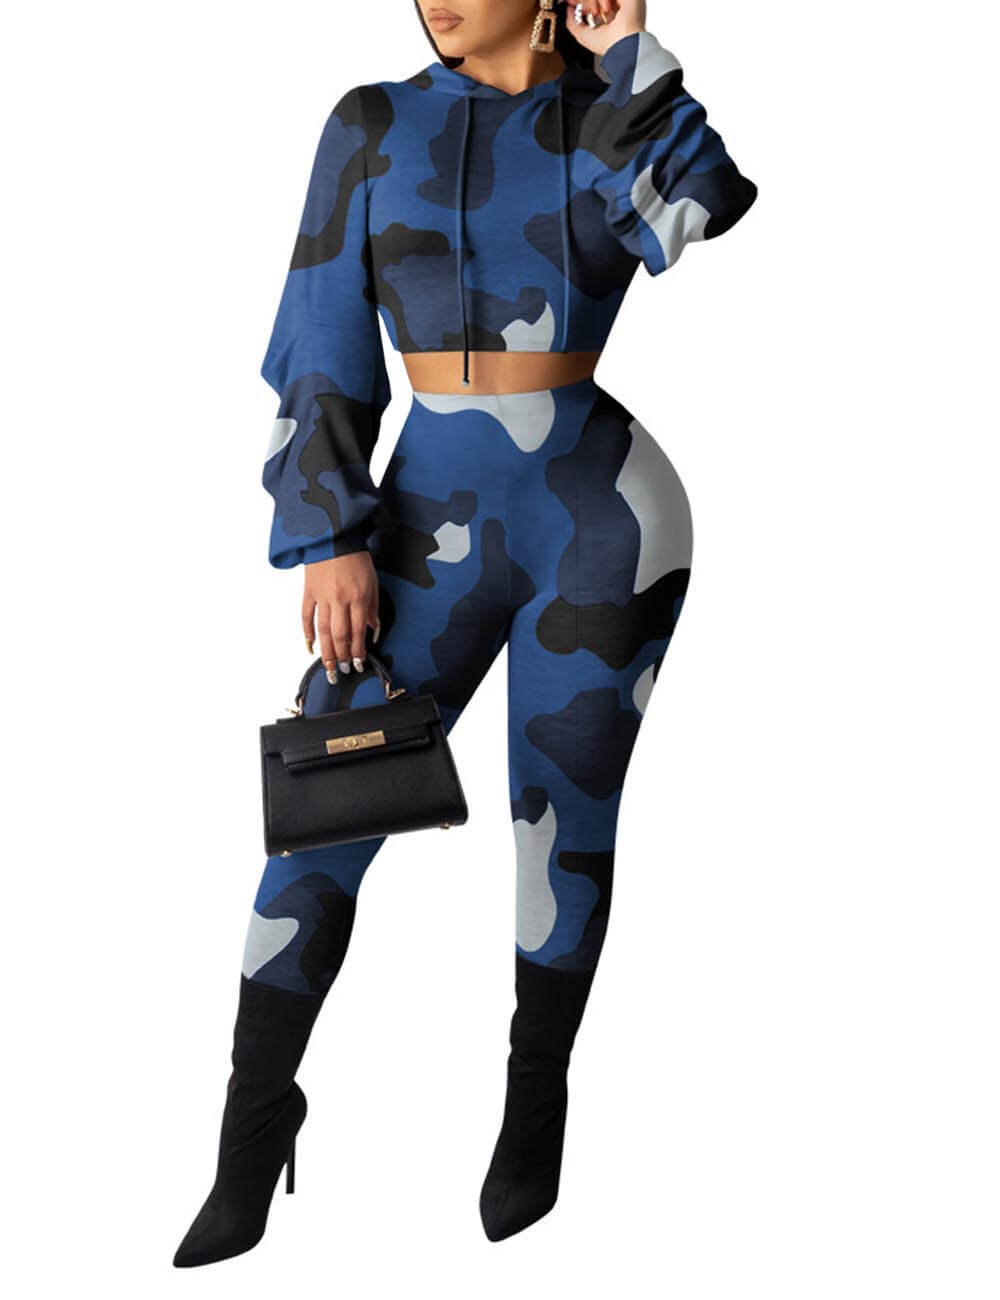  Women‘s Two Piece Outfits Como Printed Long Batwing Sleeve Hoddie Pullover Sweatshirt Bodycon Pants Set Tracksuit